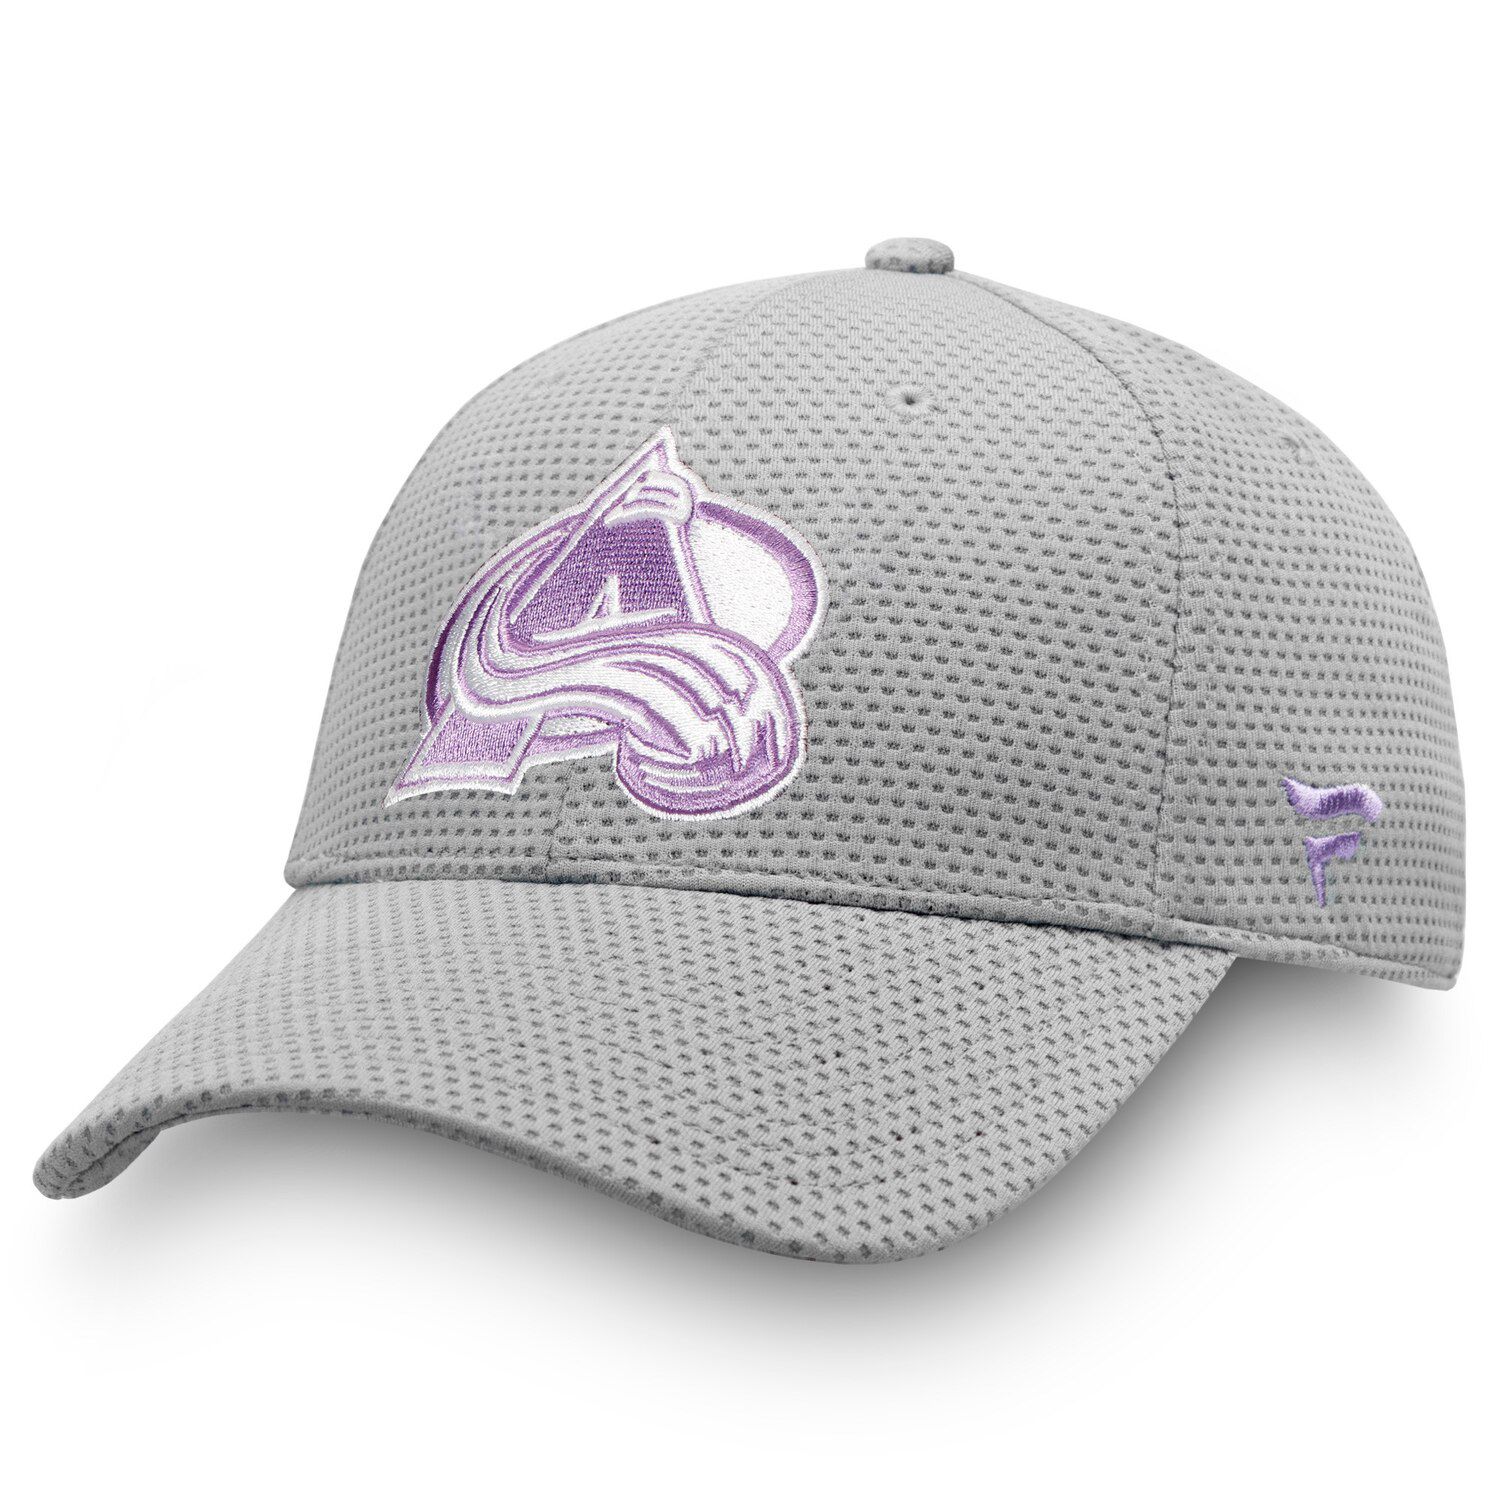 colorado avalanche hockey fights cancer hat